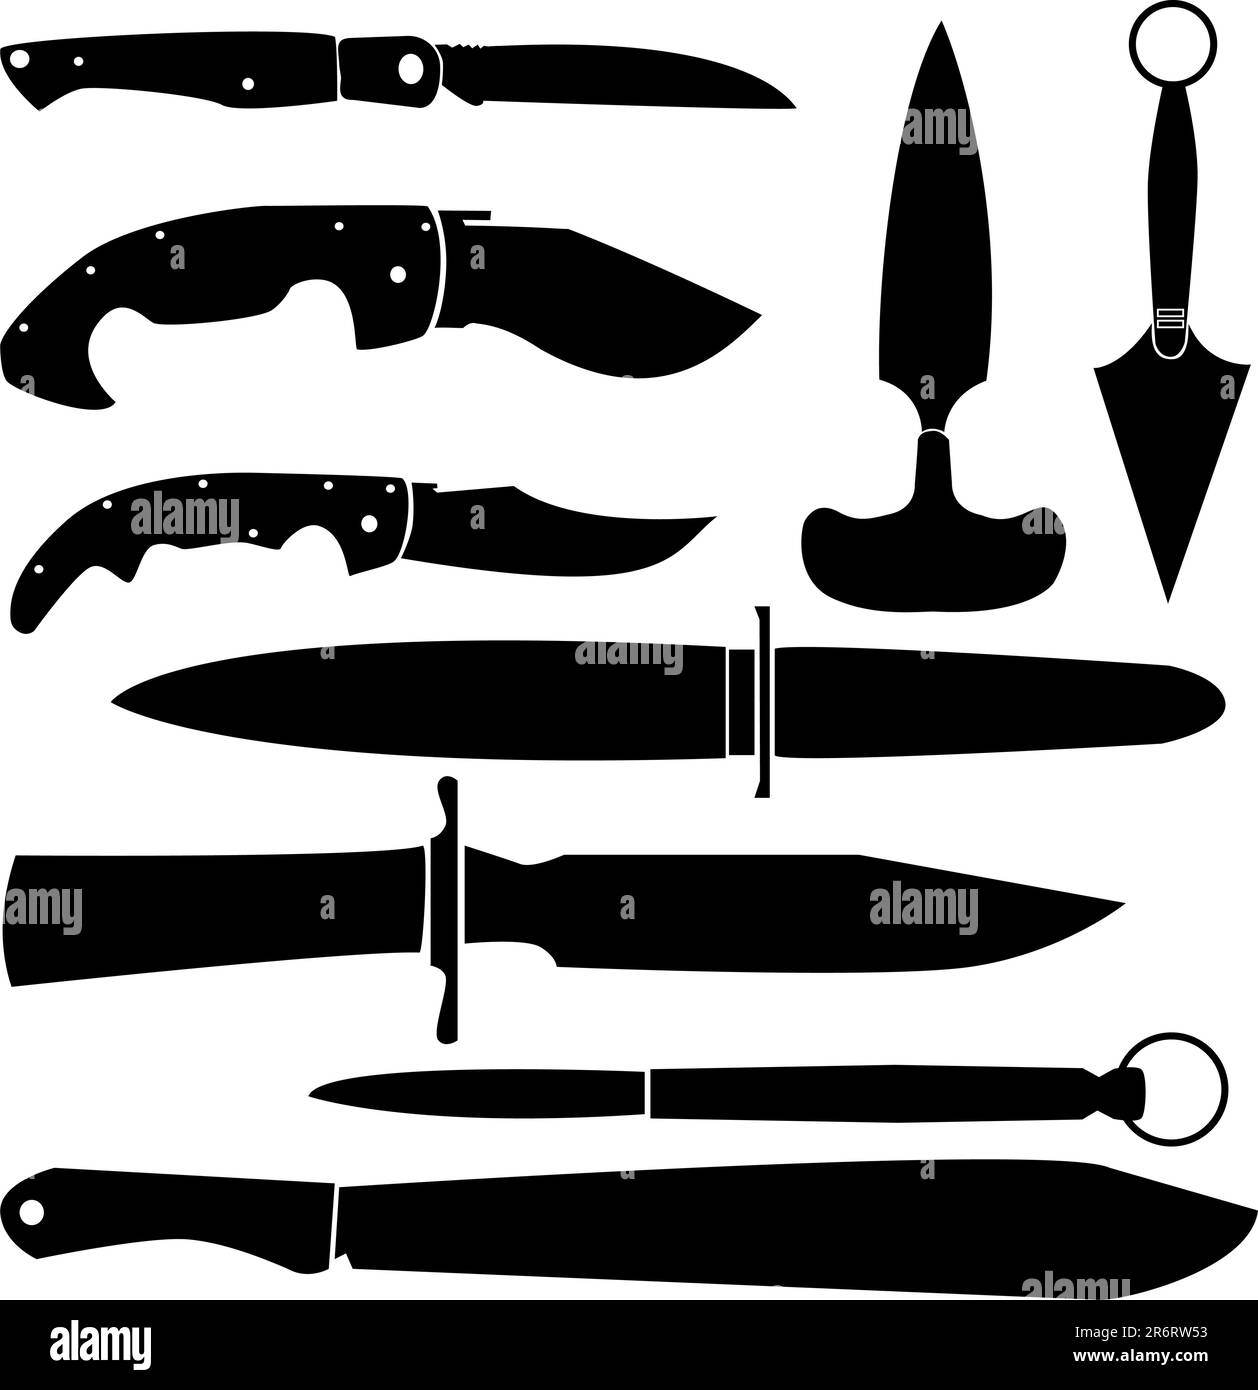 Knives, blades, and handle set in vector silhouette Stock Vector